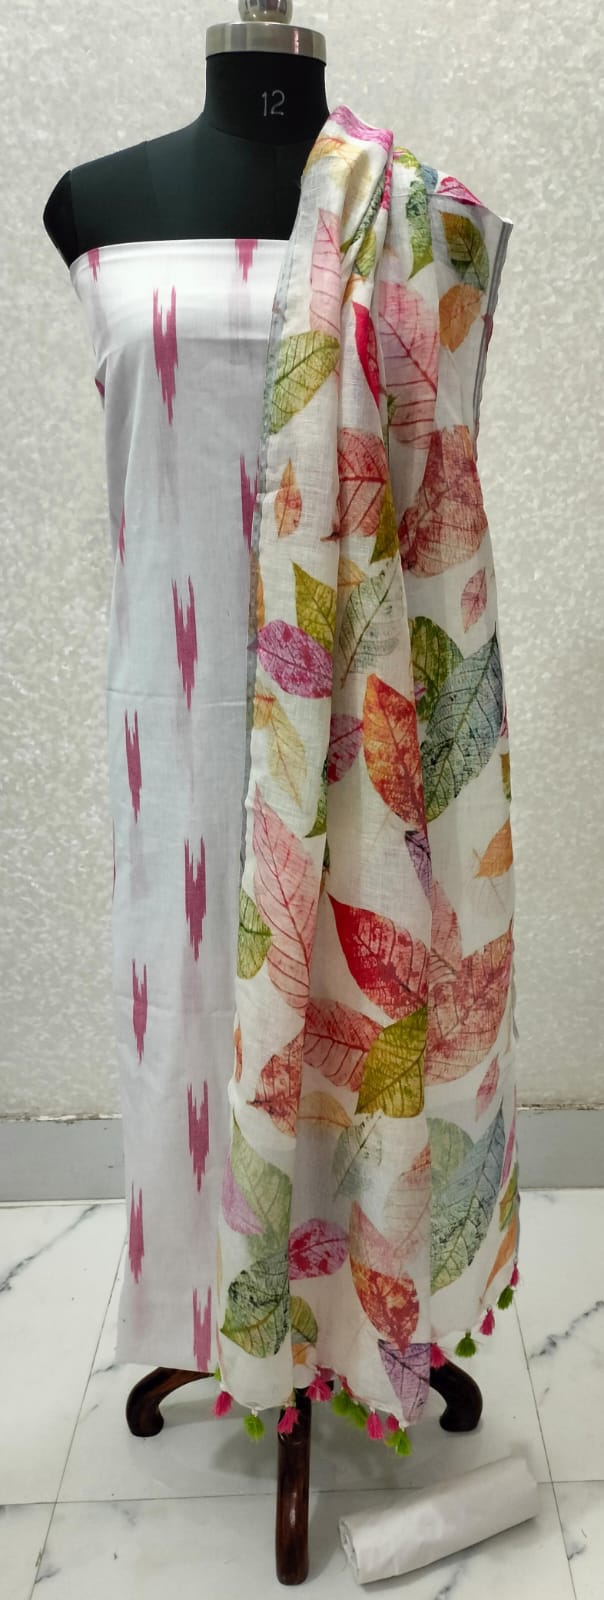 White Handloom Ikkat Top and Printed Linen Dupatta 2Pc Unstitched Dress Material